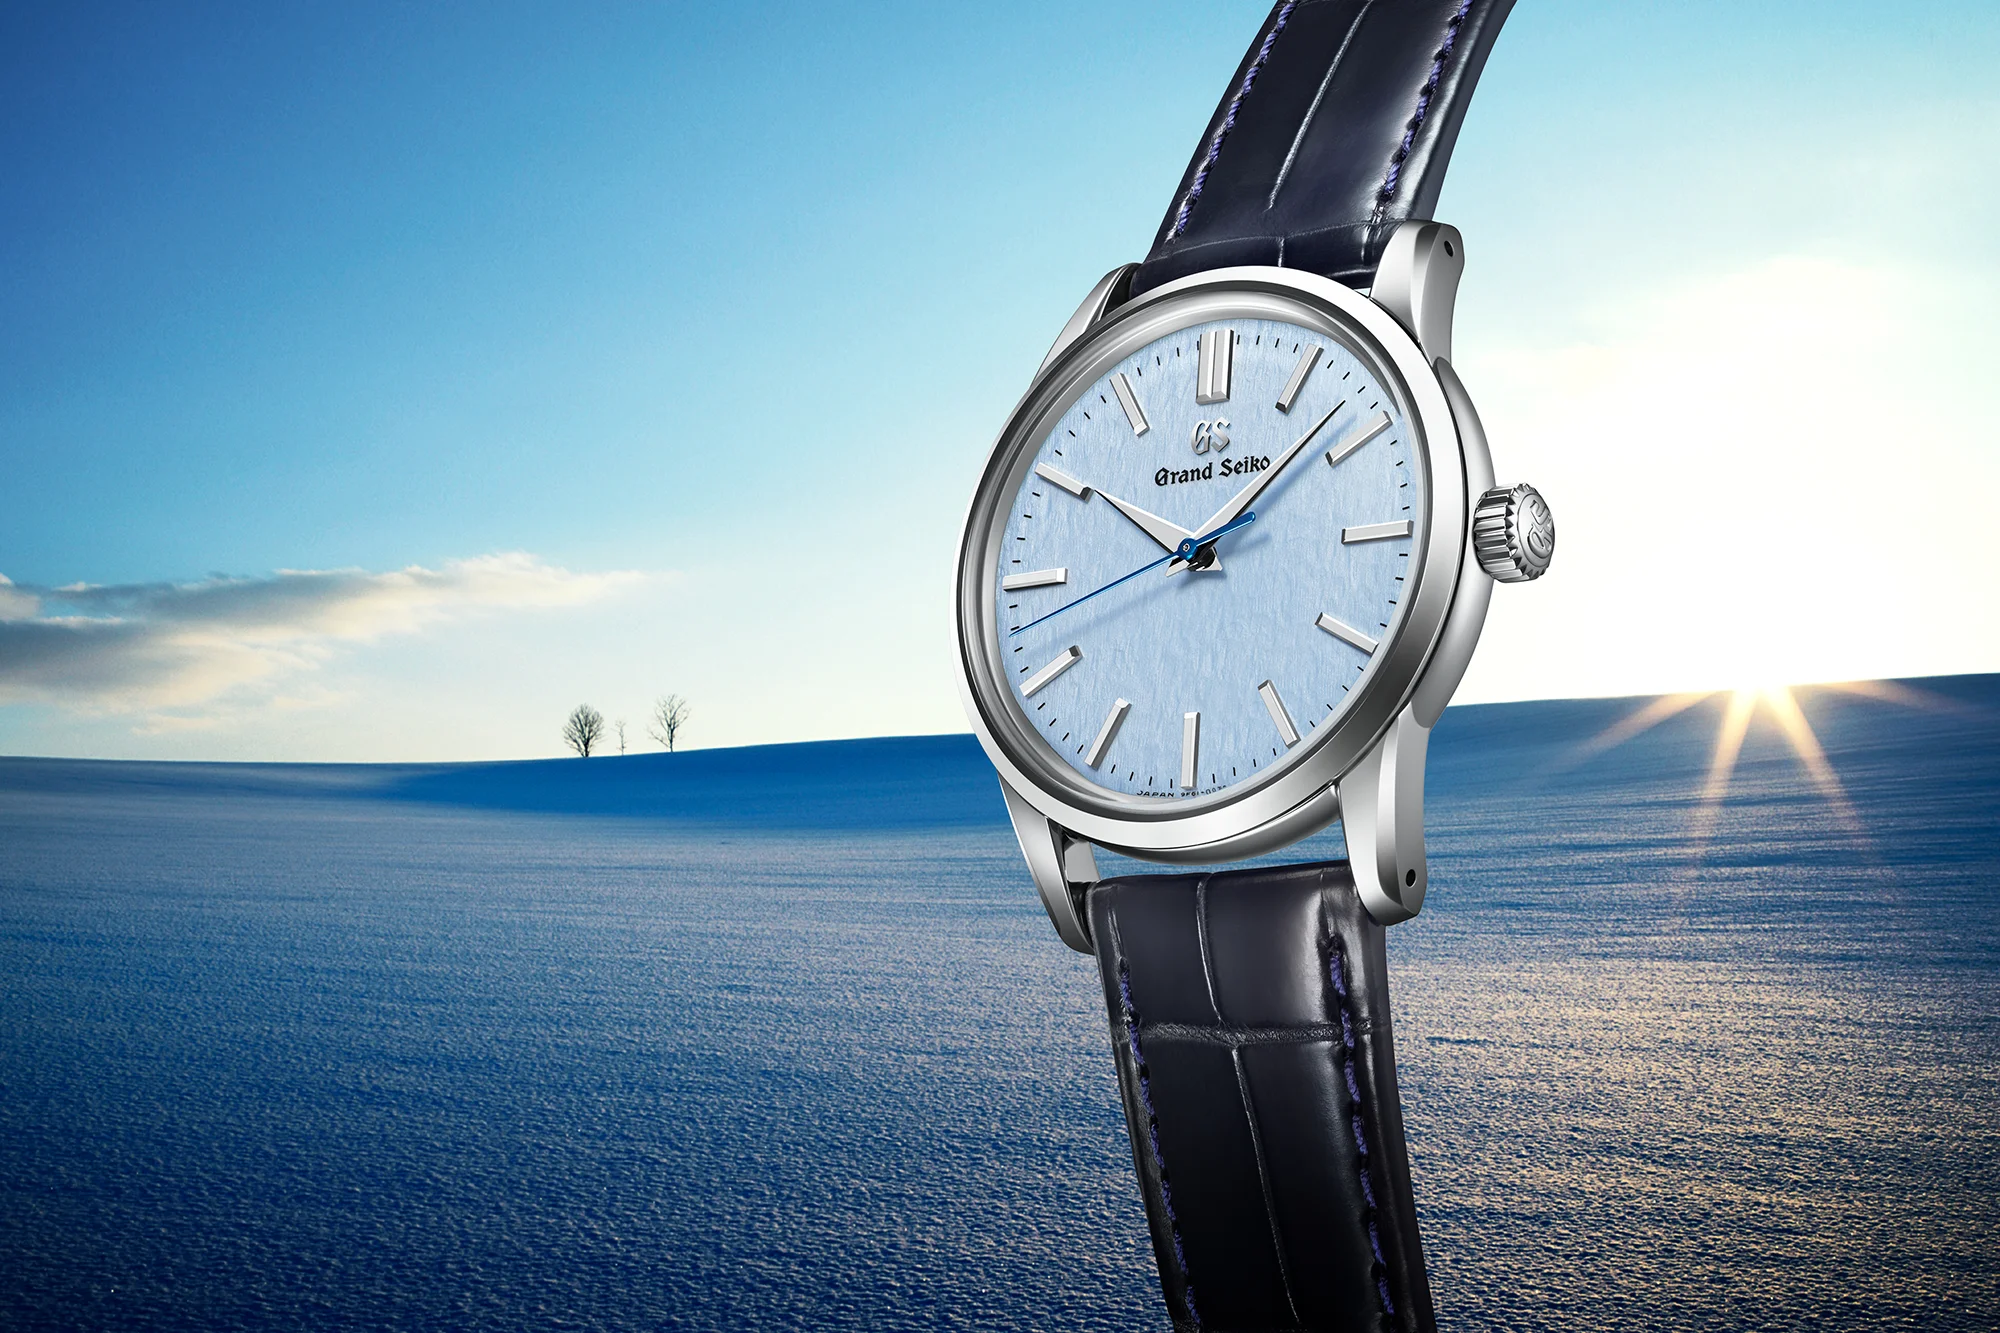 Grand Seiko blue dial watch reference SBGX353.